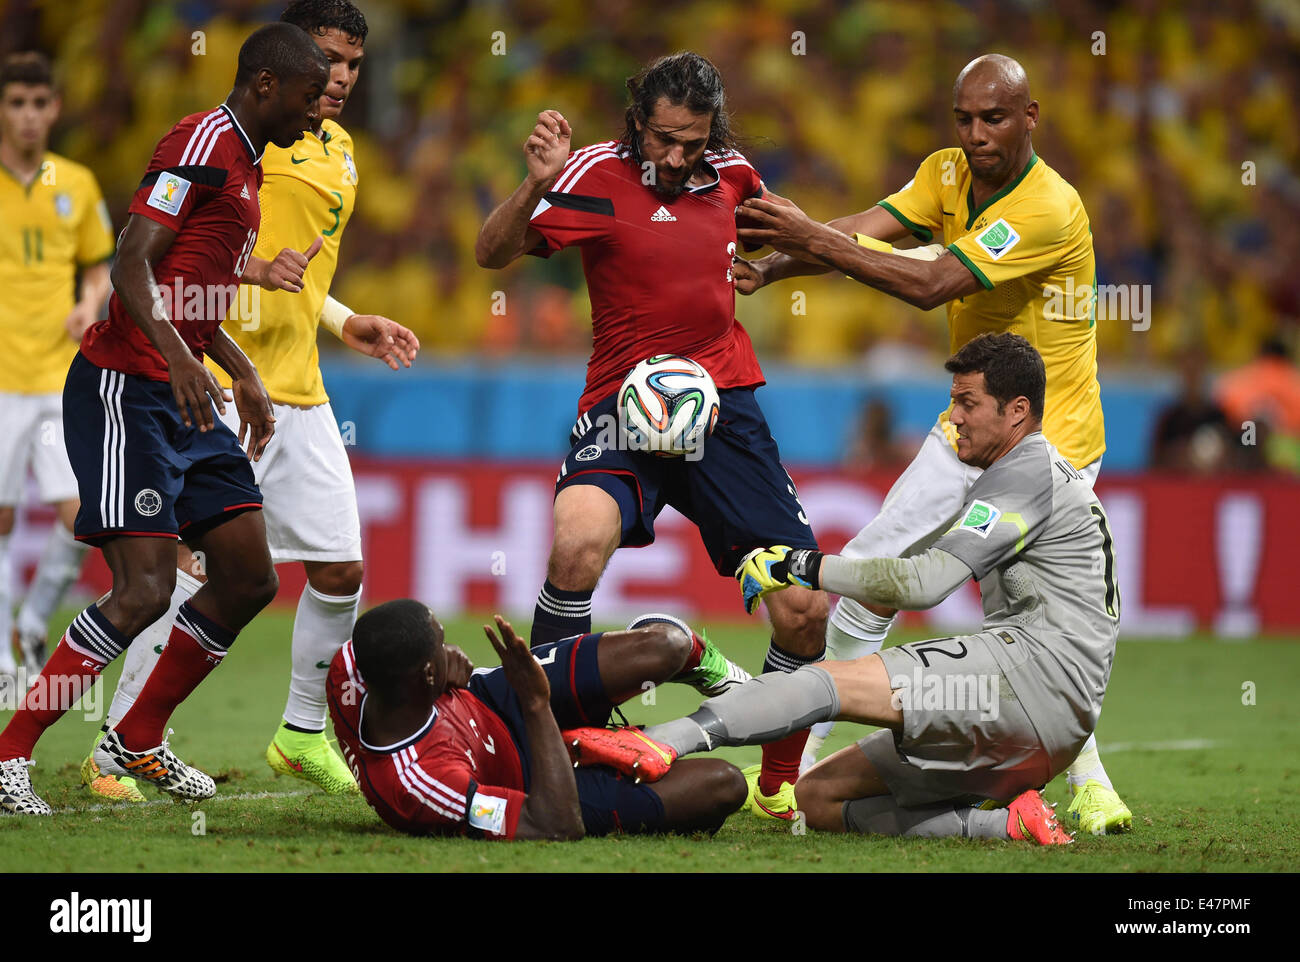 Fortaleza, Brazil. 04th July, 2014. Goalkeeper Julio Cesar (R) of Brazil and Mario Yepes (C) and Cristian Zapata (down) of Colombia vie for the ball during the FIFA World Cup 2014 quarter final match soccer between Brazil and Colombia at the Estadio Castelao in Fortaleza, Brazil, 04 July 2014. Photo: Marius Becker/dpa/Alamy Live News Stock Photo